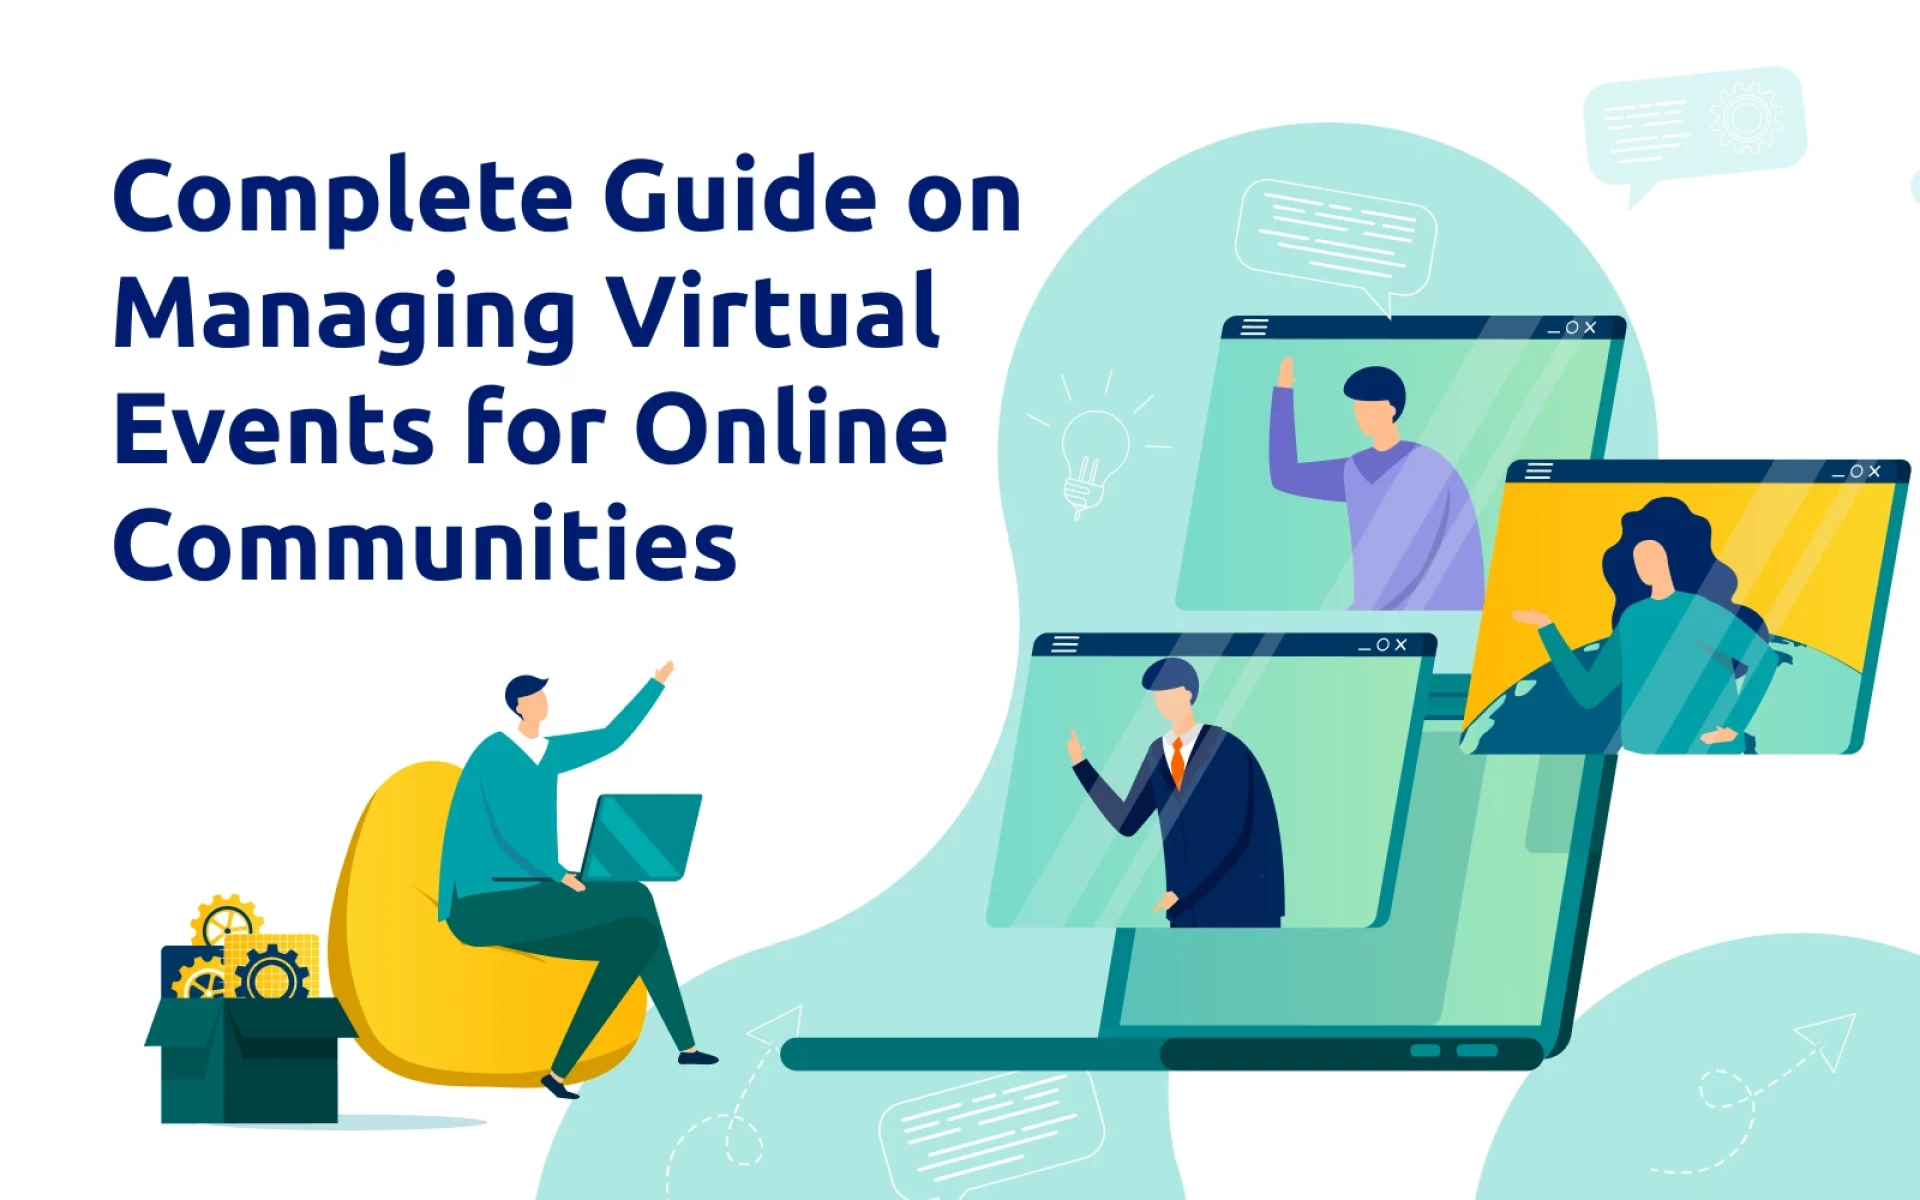 Complete Guide on Managing Virtual Events for Online Communities